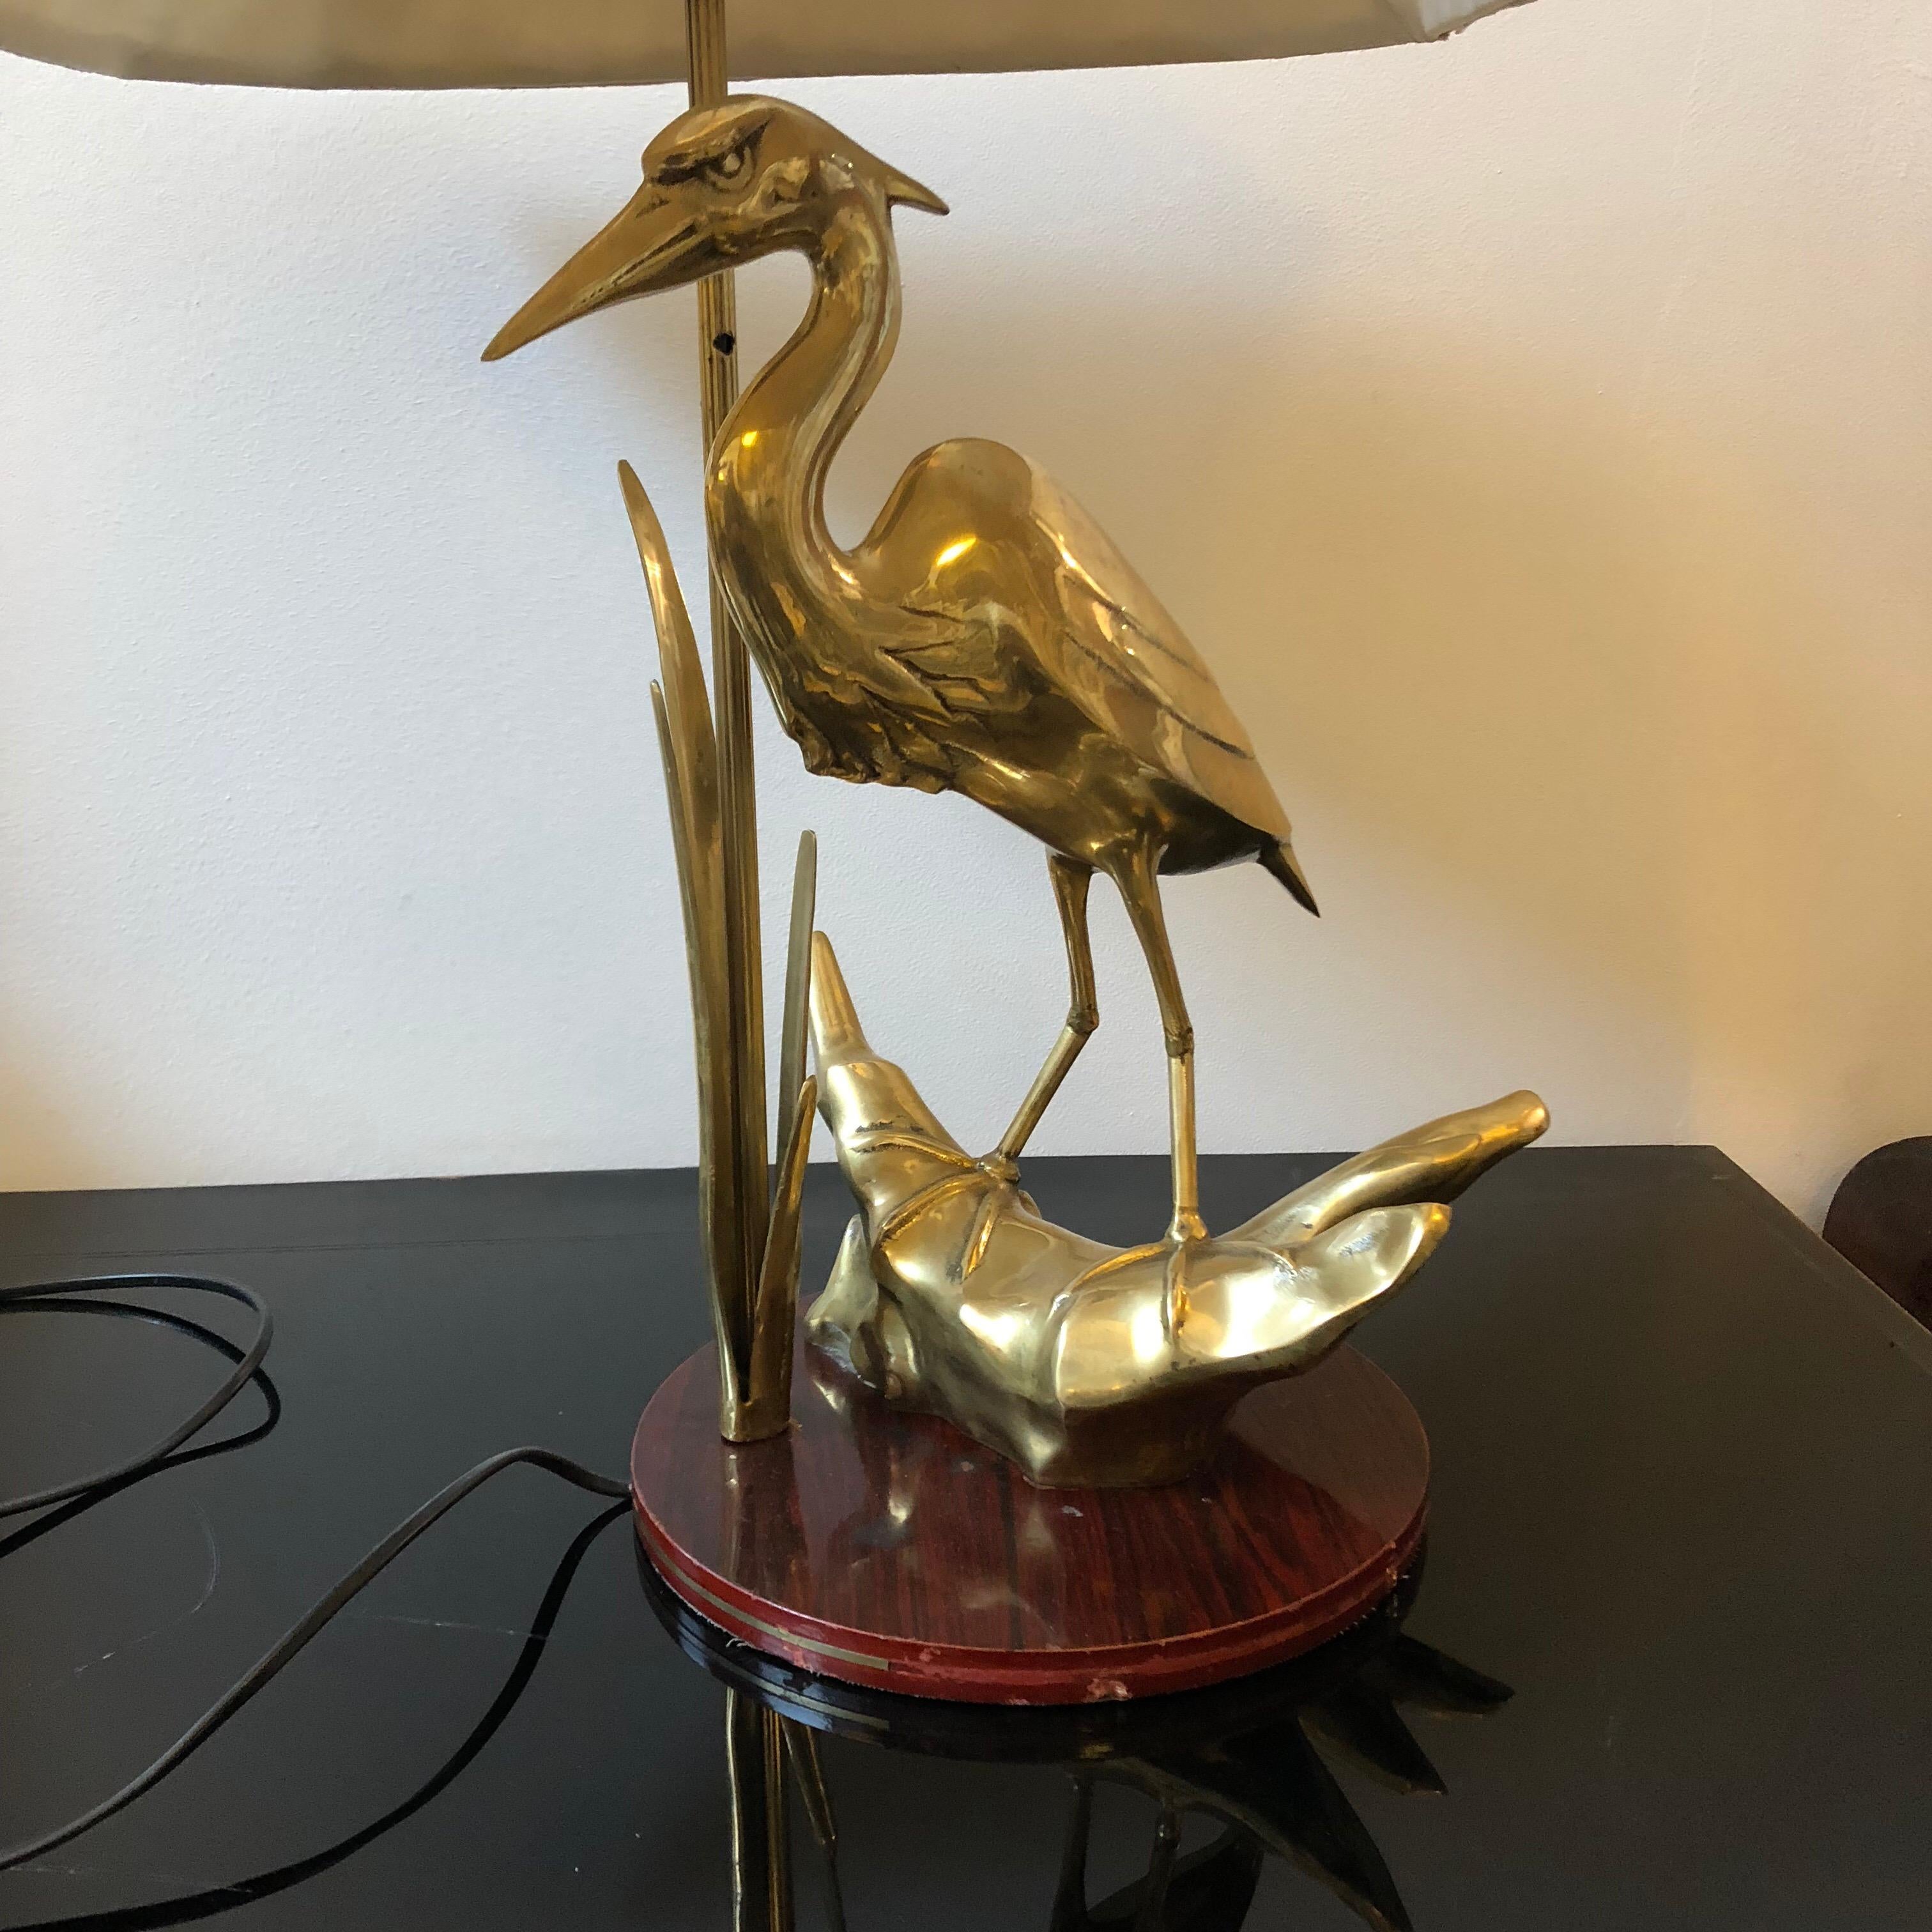 Particular Mid-Century Modern brass and wood base table lamp, fully restored electrical parts, works with 110-240 Volts and need a regular e27 bulb. New lampshade.